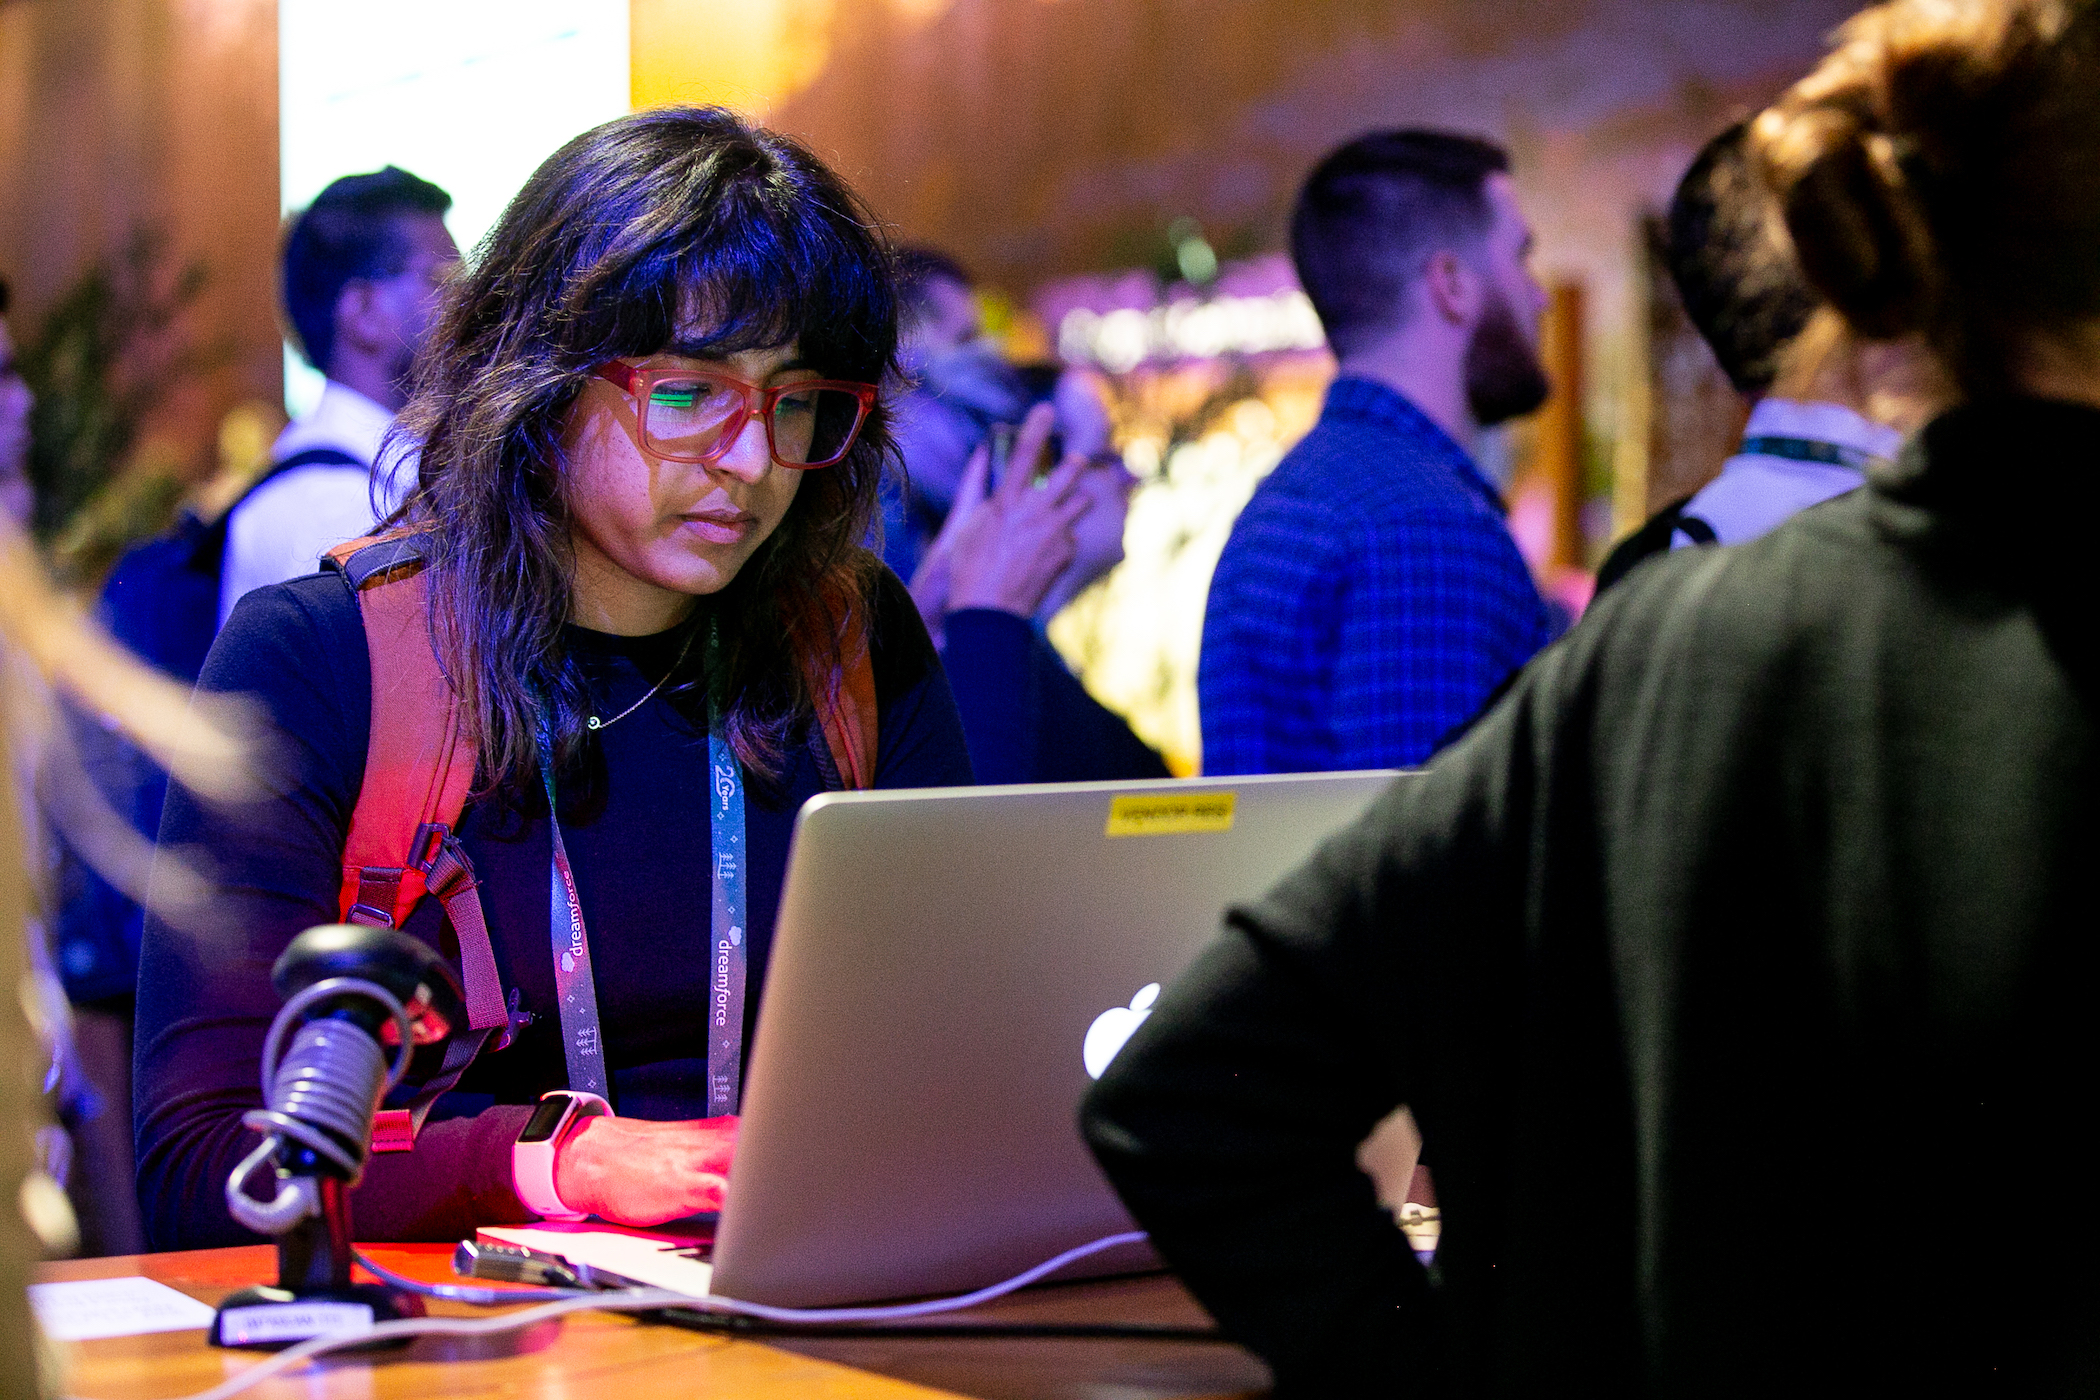 A woman with dark hair and glasses uses a laptop at a recent Dreamforce22 event.